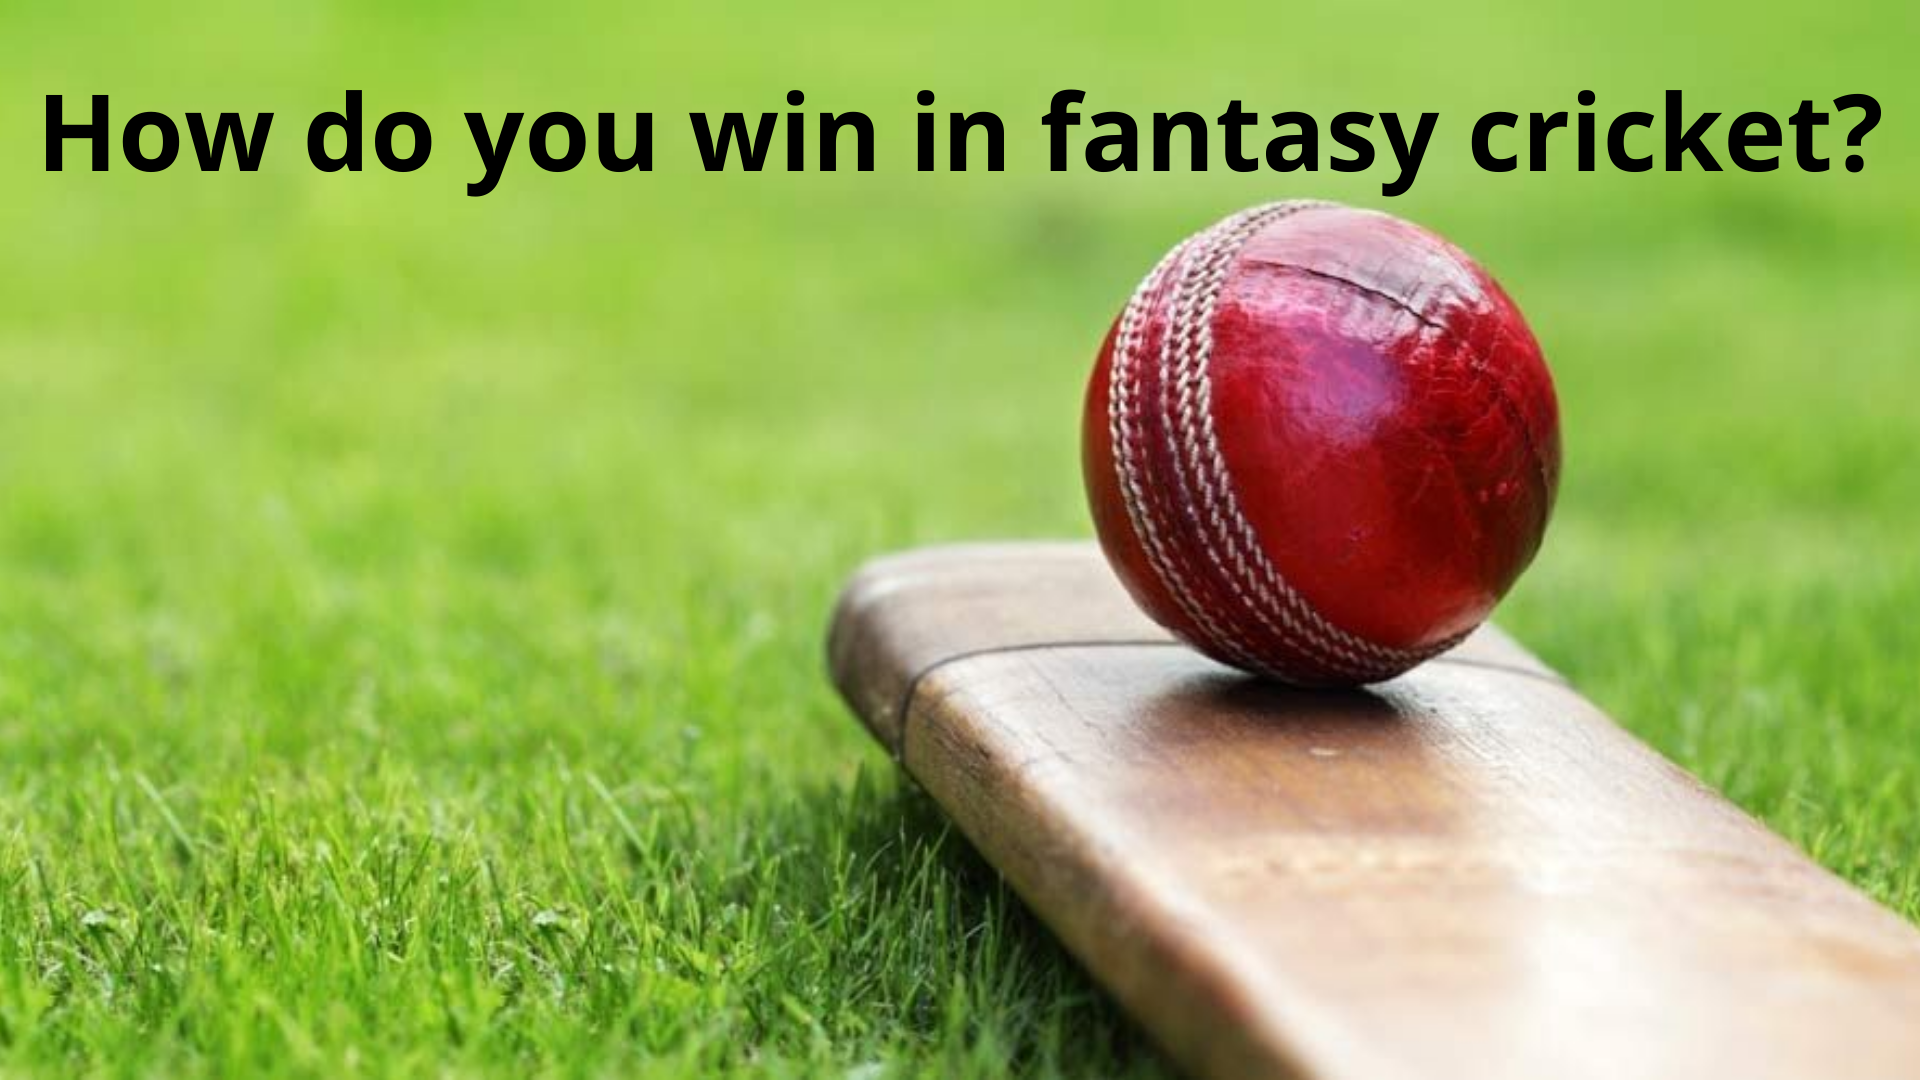 How do you win in fantasy cricket?